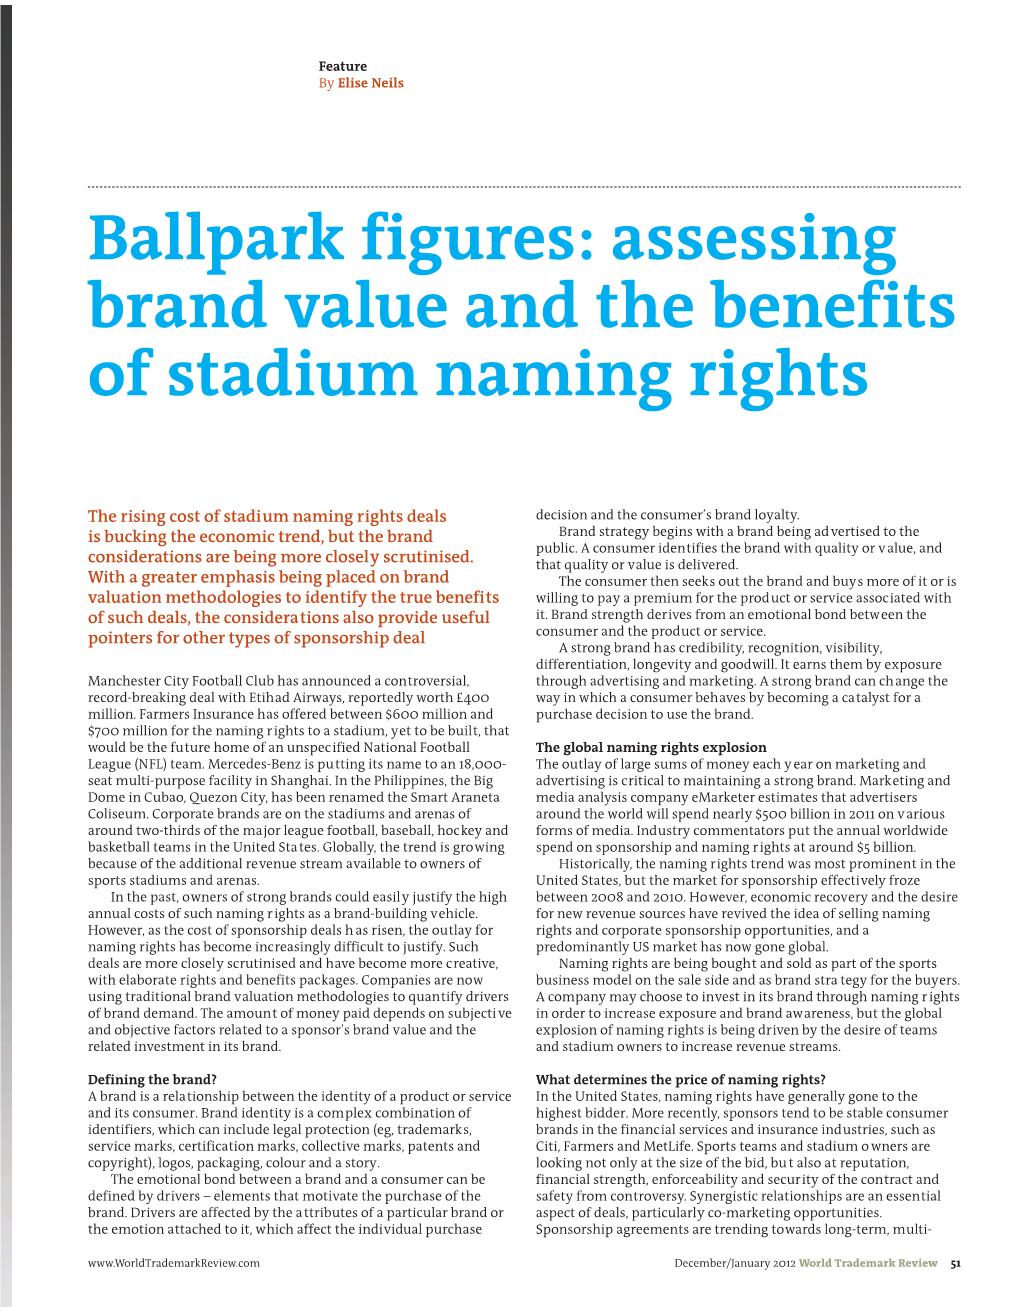 Assessing Brand Value and the Benefits of Stadium Naming Rights